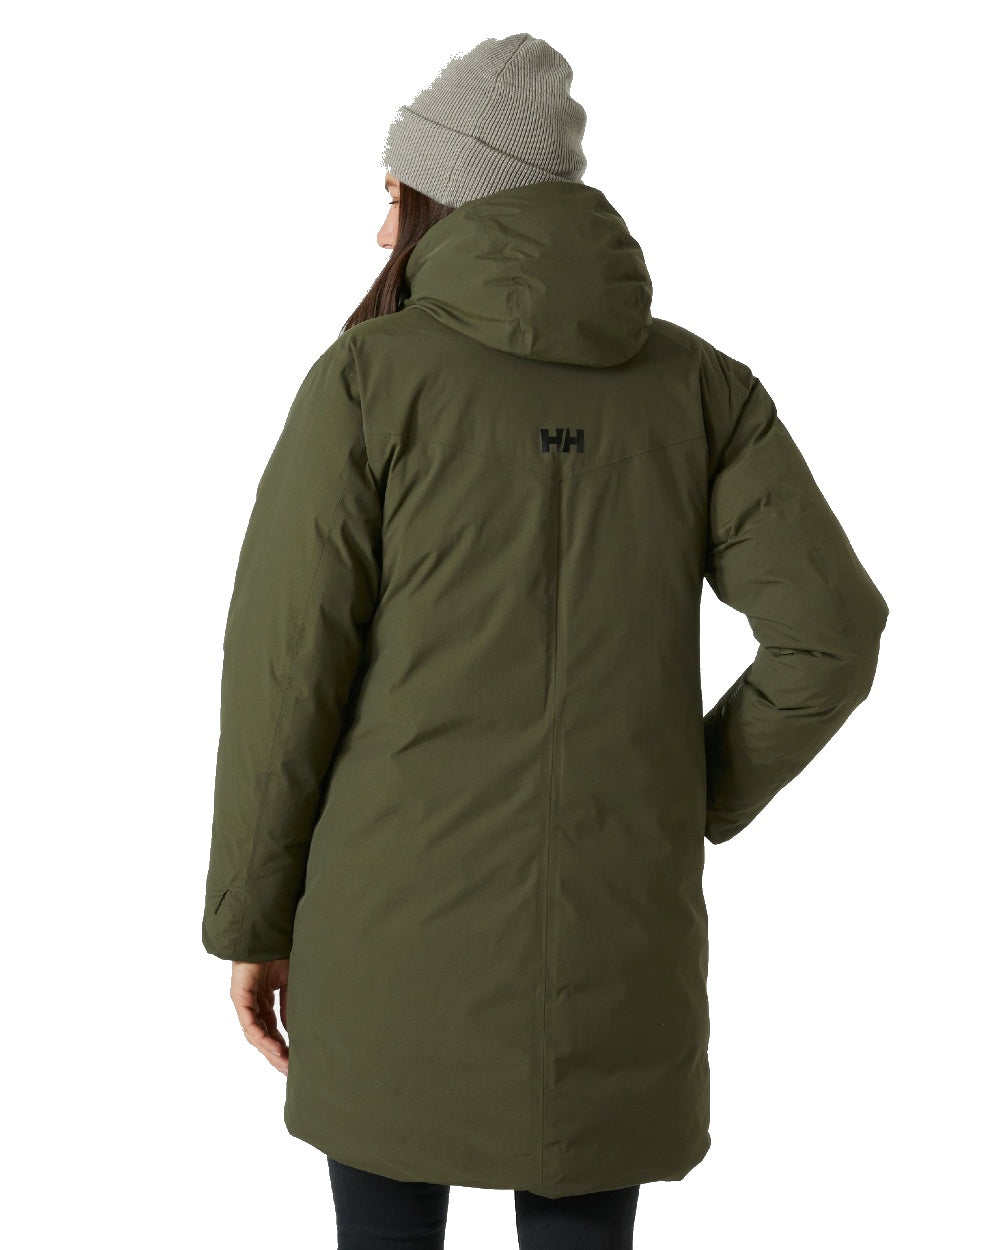 Helly Hansen Womens Adore Helly Tech Parka in Utility Green 